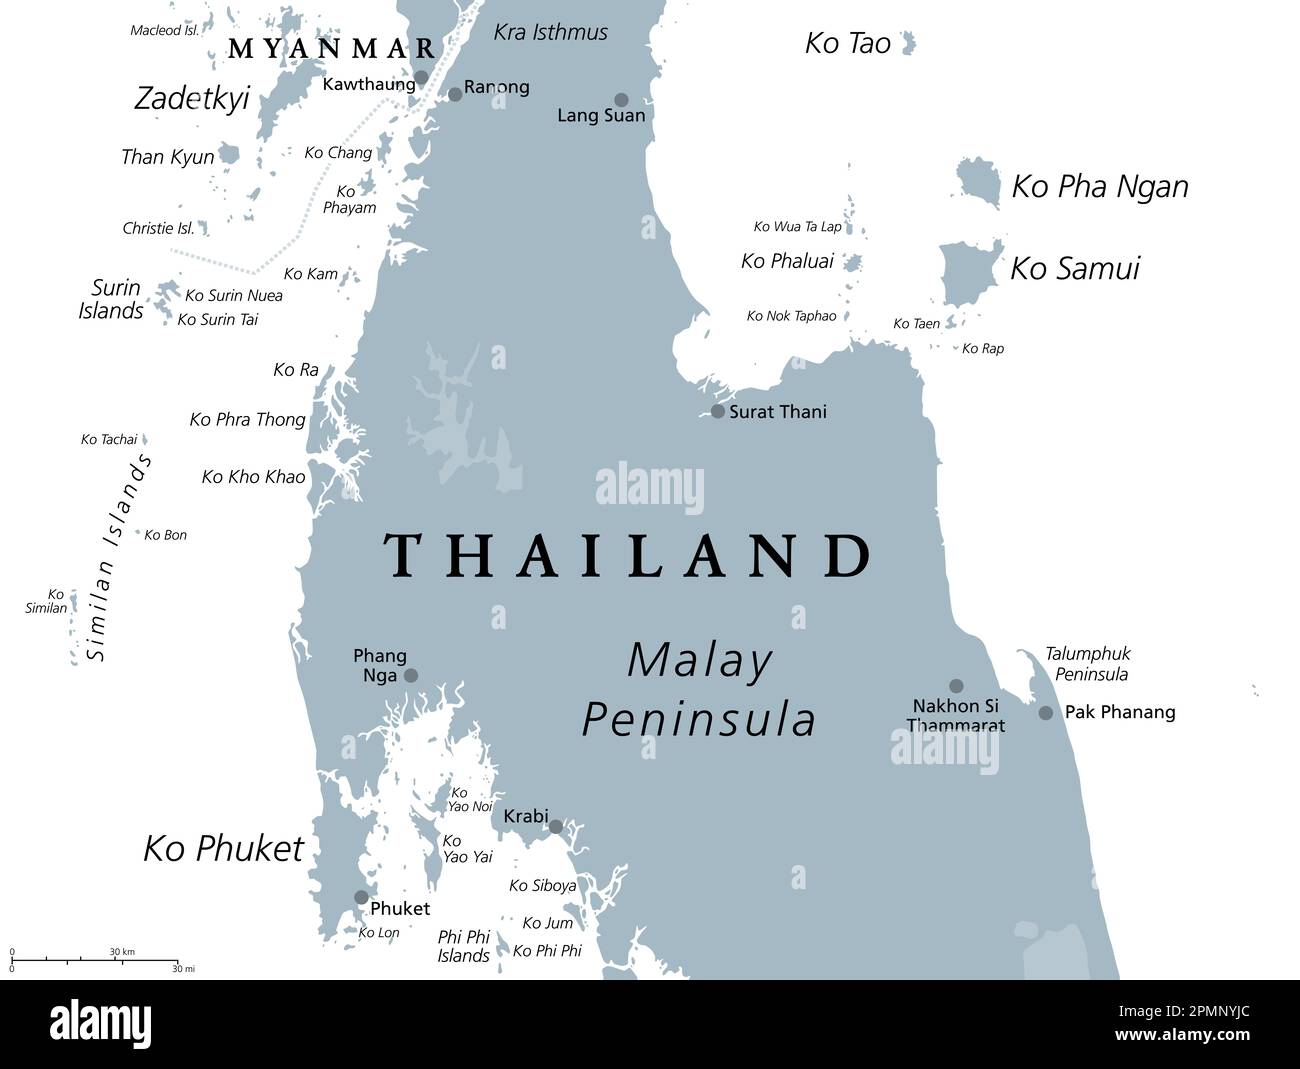 From Ko Samui to Phuket, Thailand, gray political map. Travel destinations west and east of the Malay Peninsula, off the coast of Thailand. Stock Photo